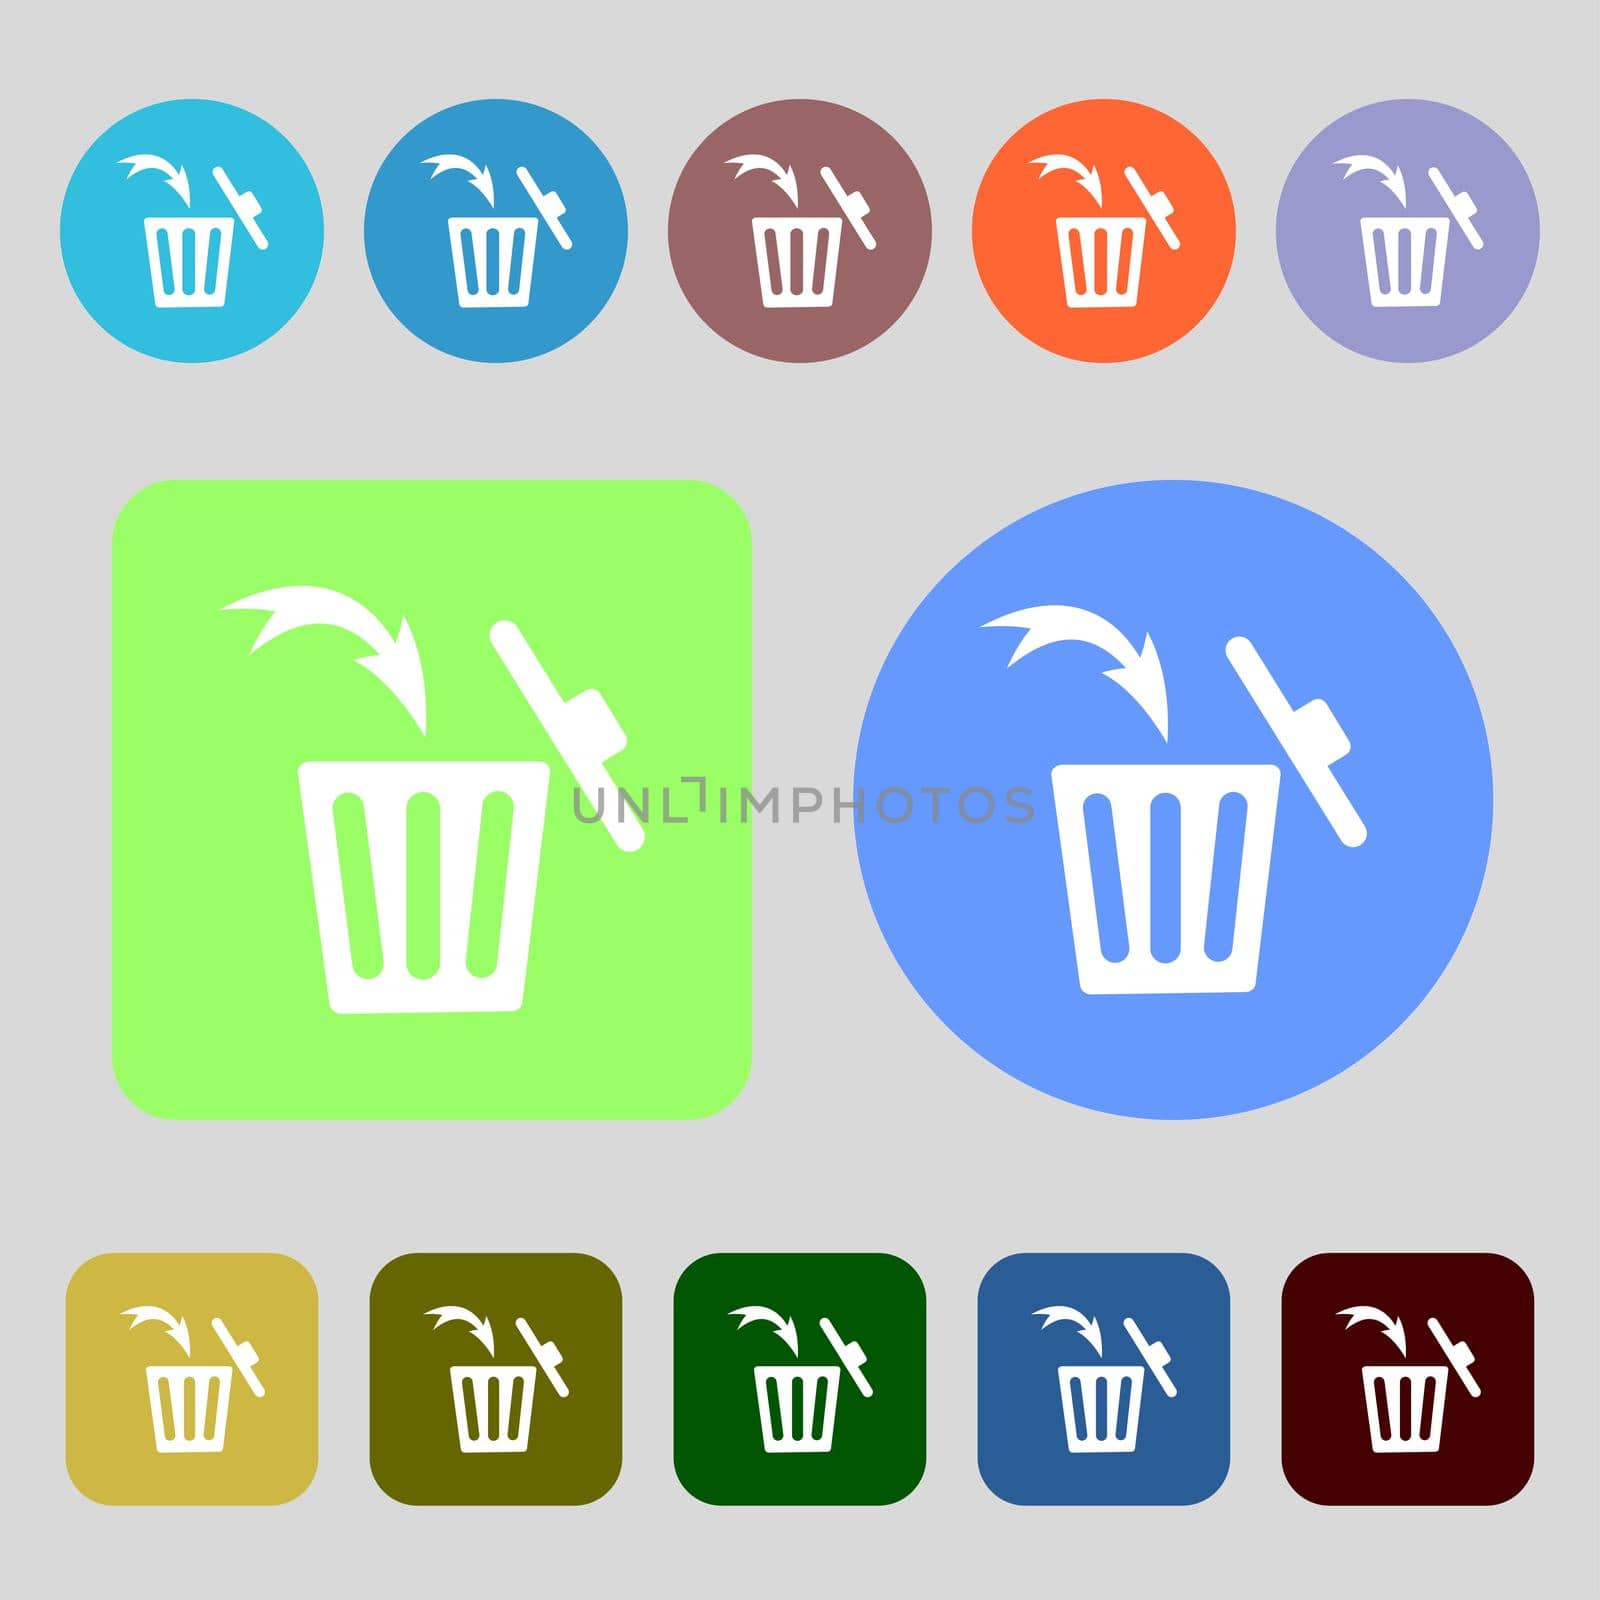 Recycle bin sign icon.12 colored buttons. Flat design. illustration